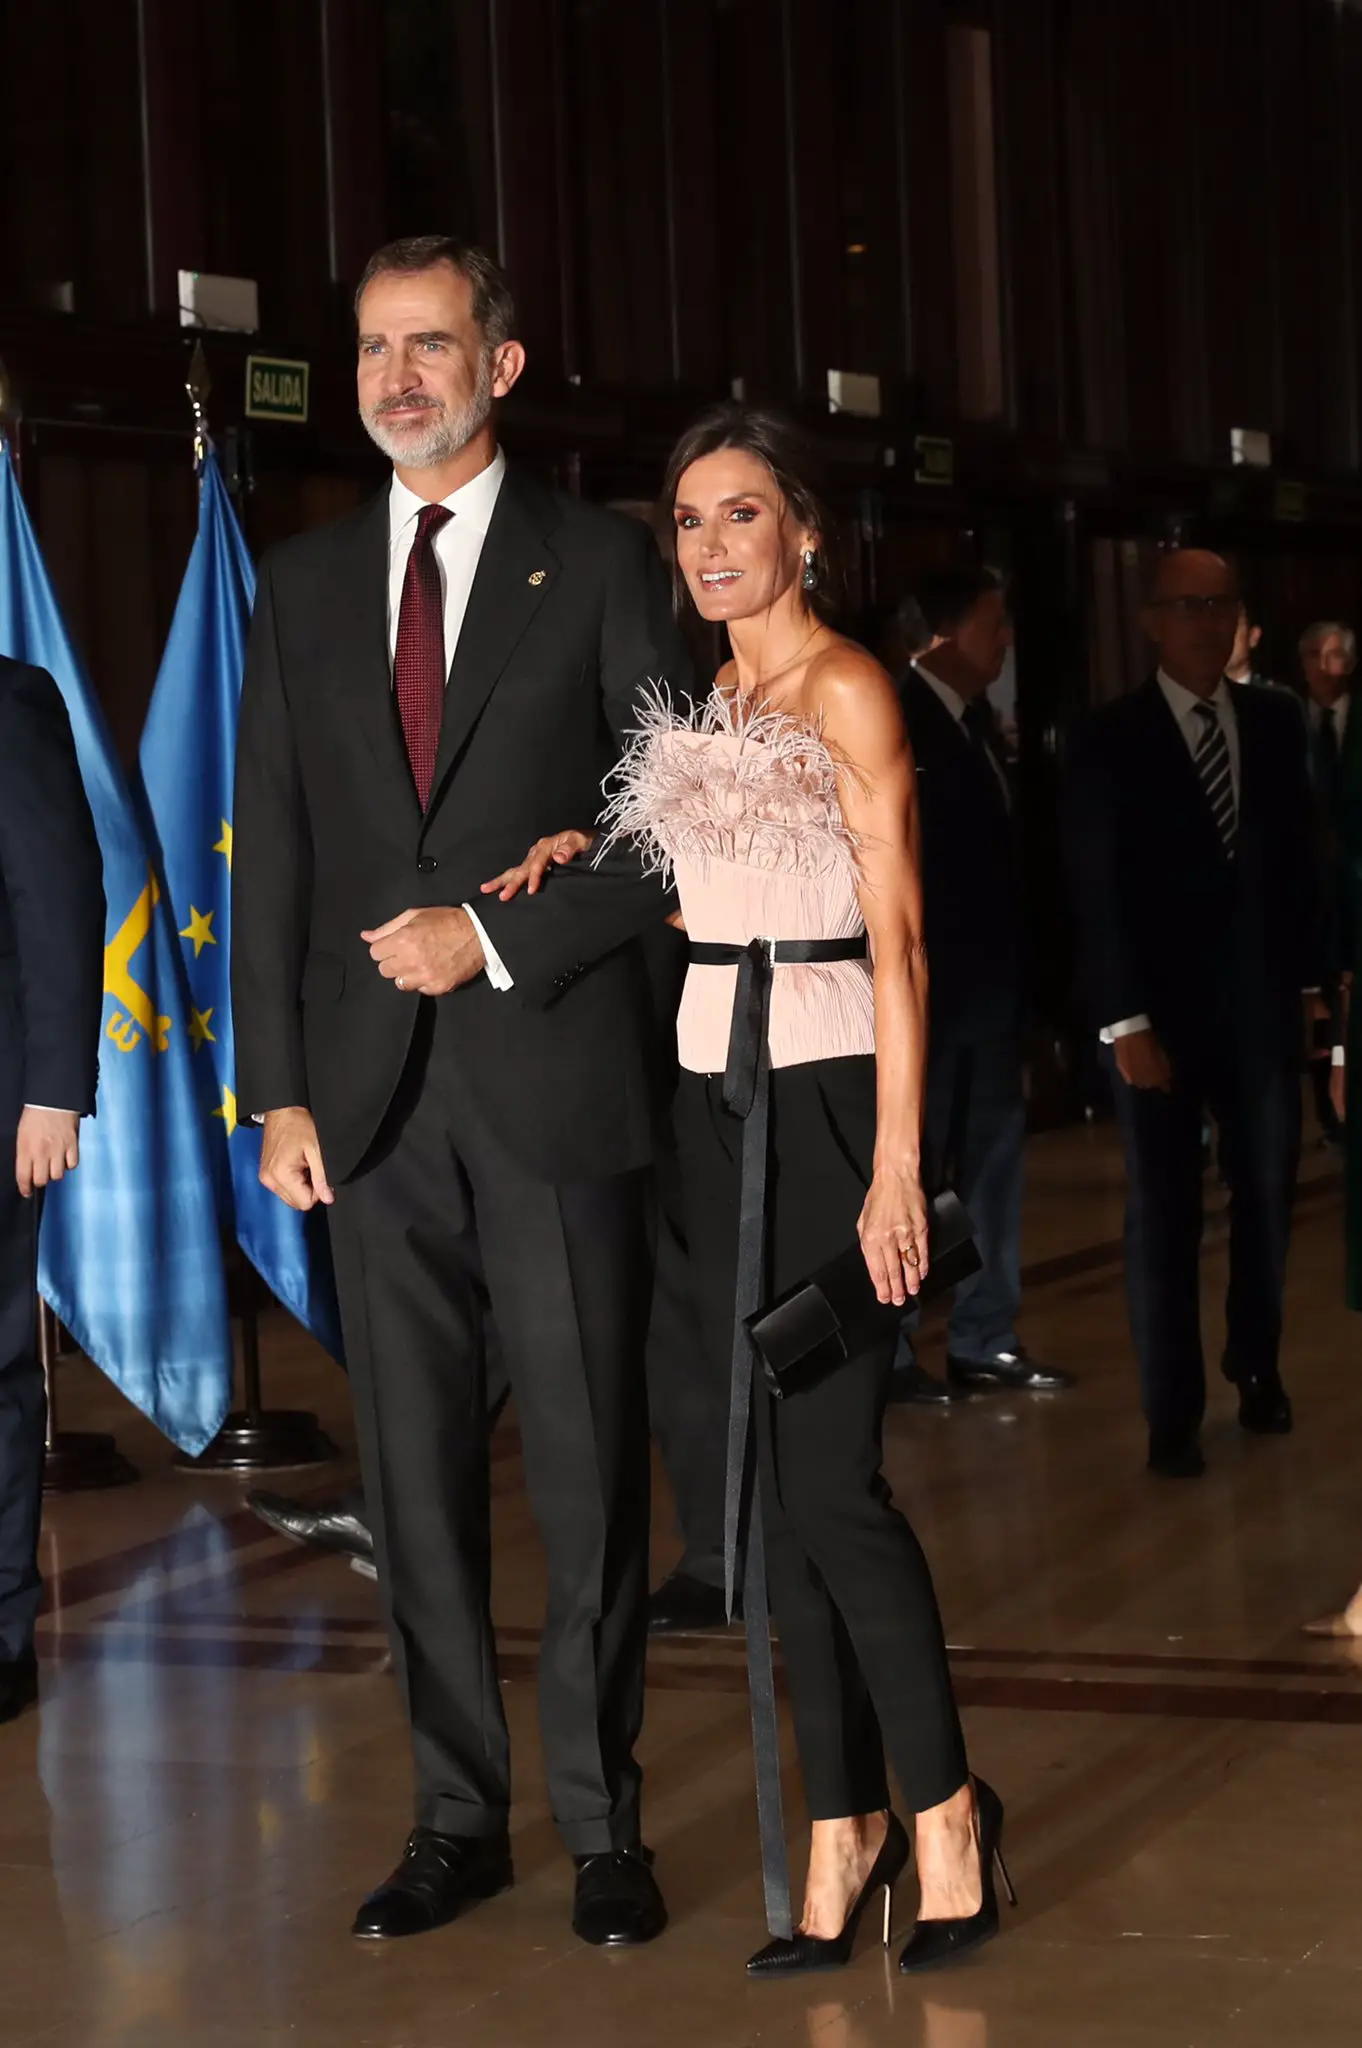 Queen Letizia dazzled in the 2nd skin top and pants at princess of asturias awards musical concert 1